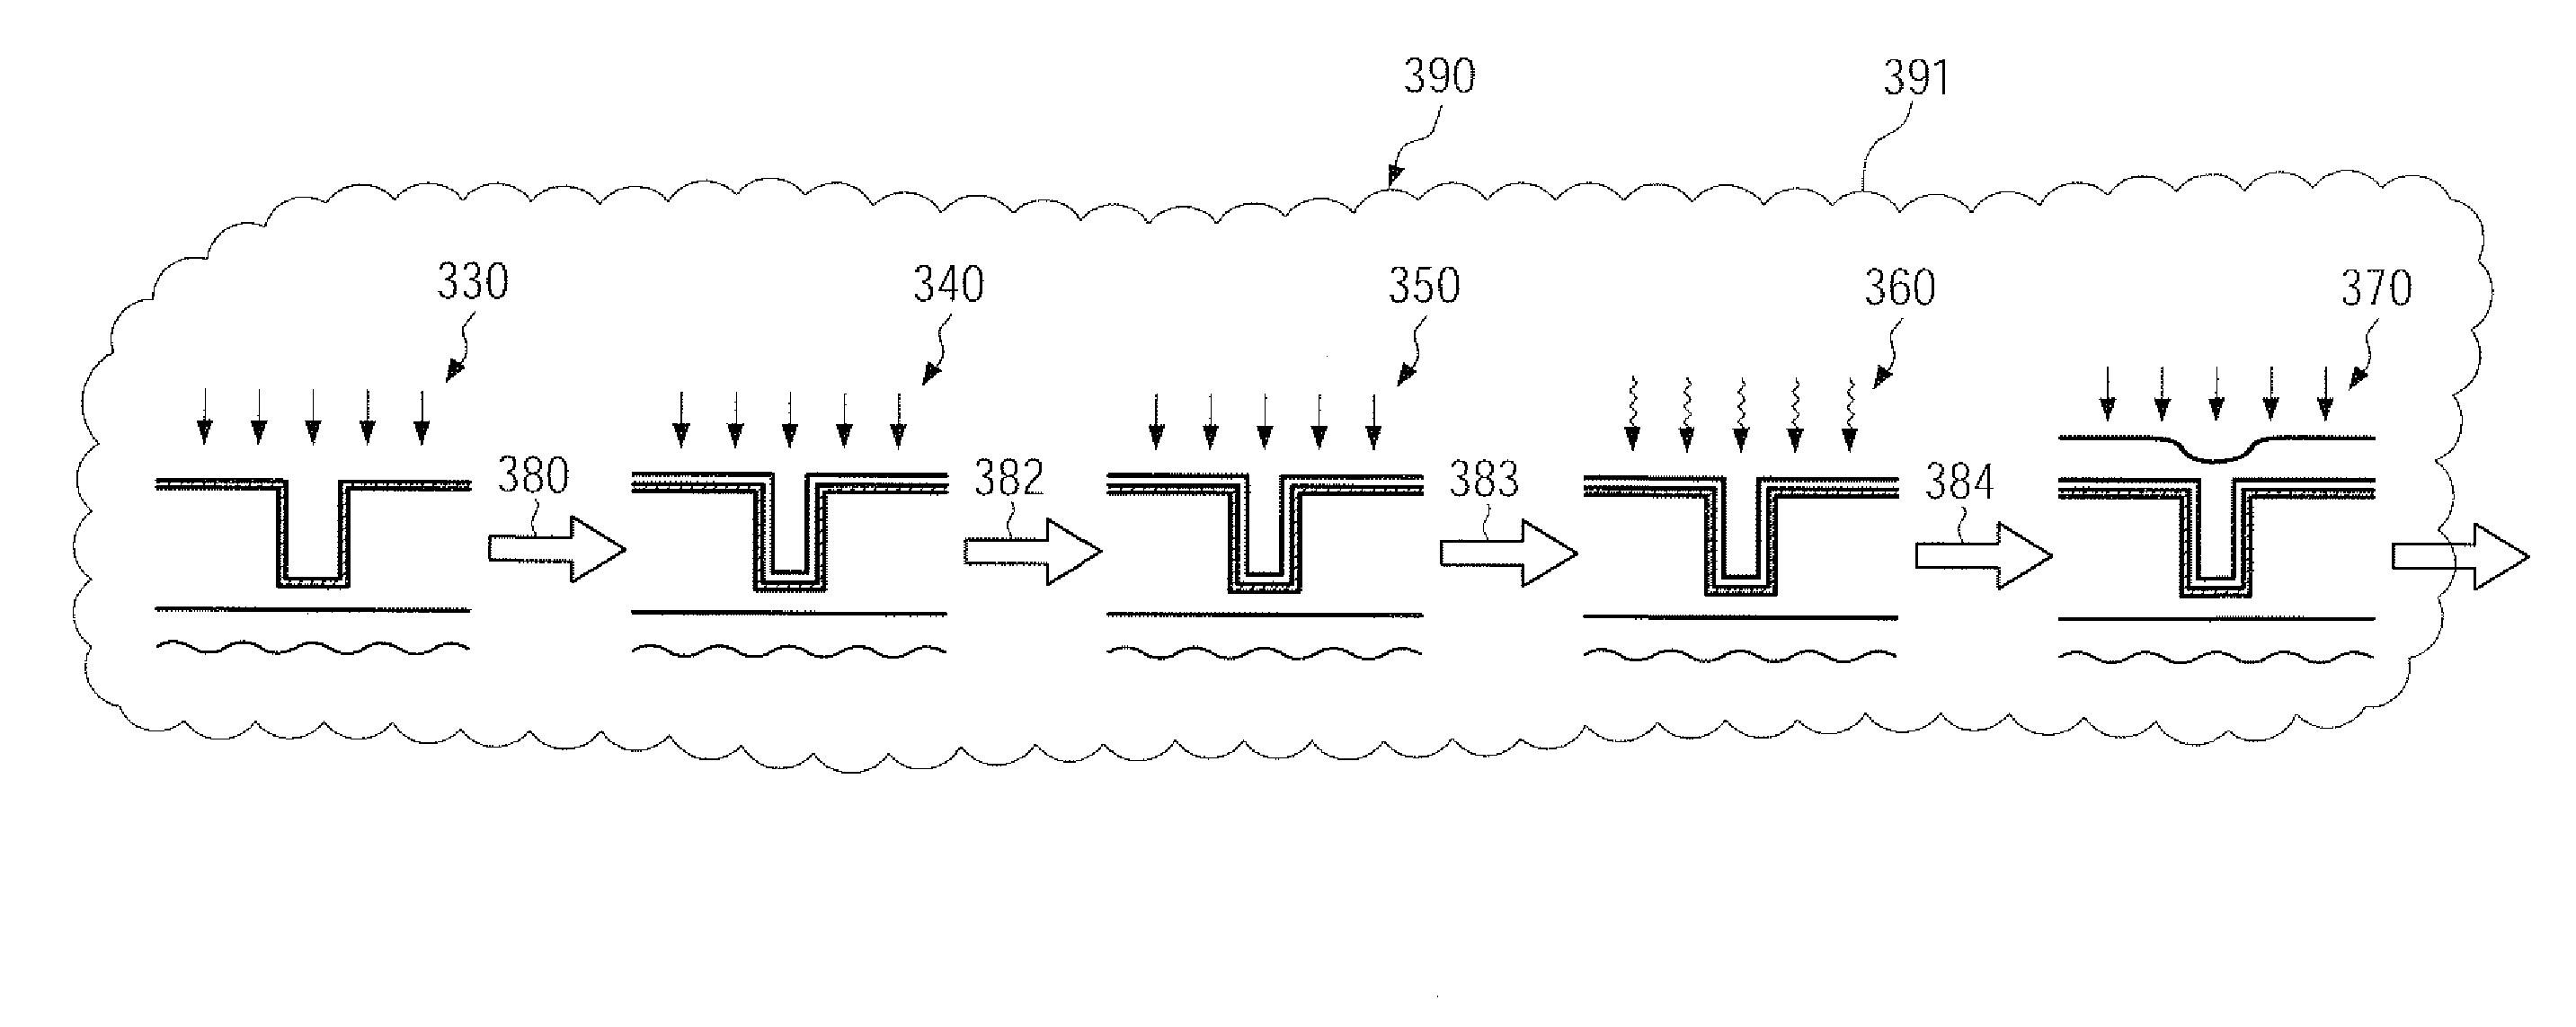 Method of forming a metal directly on a conductive barrier layer by electrochemical deposition using an oxygen-depleted ambient